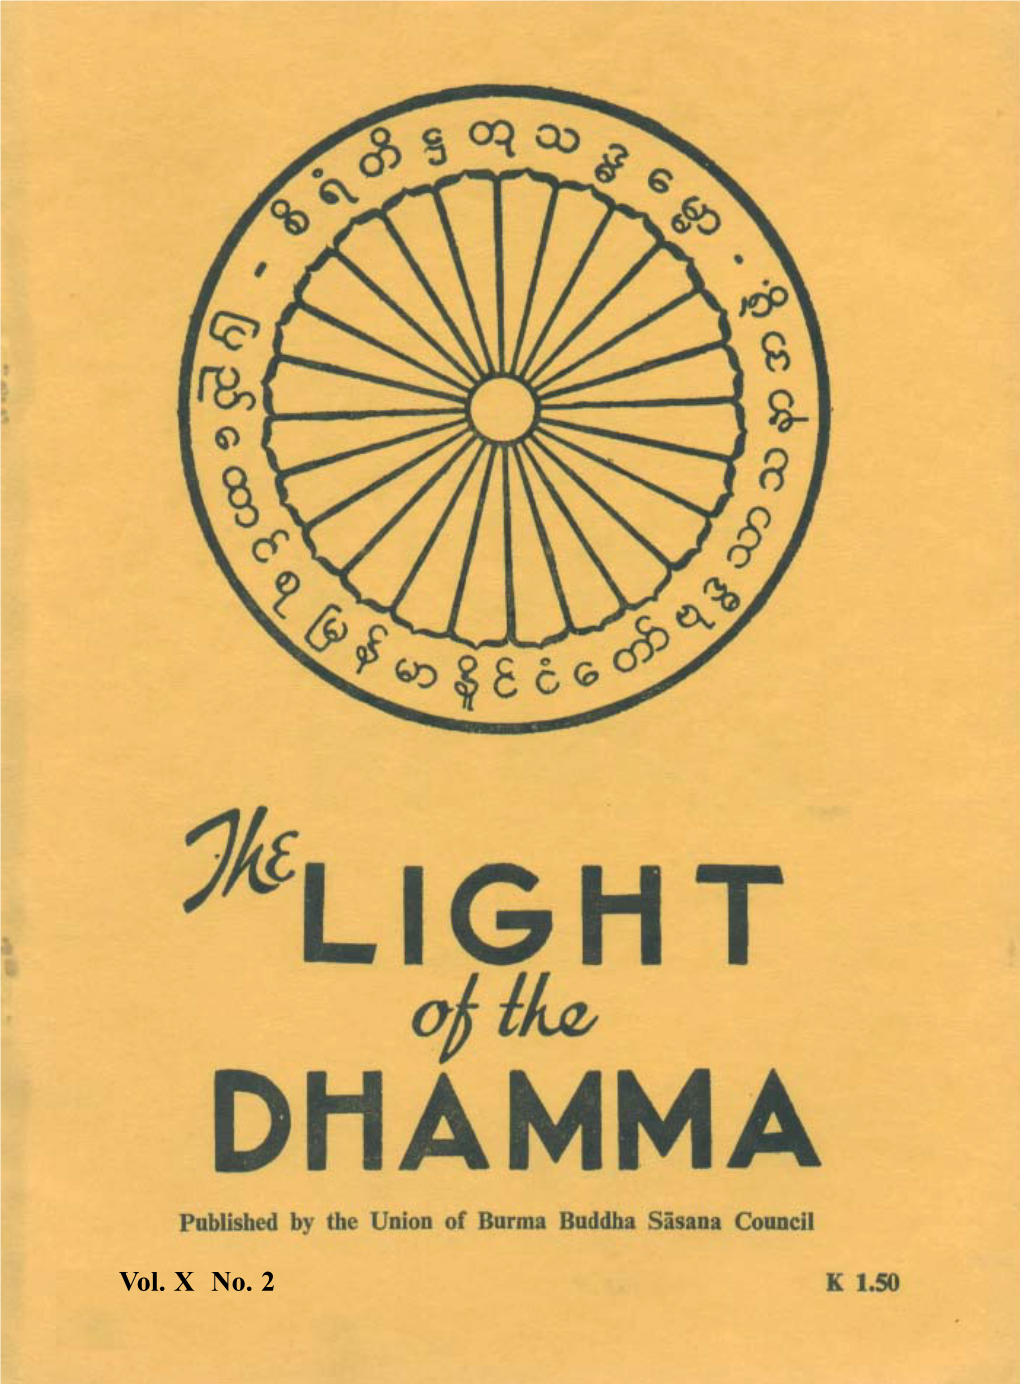 The Light of the Dhamma Vol 10 No 2, July, 1963